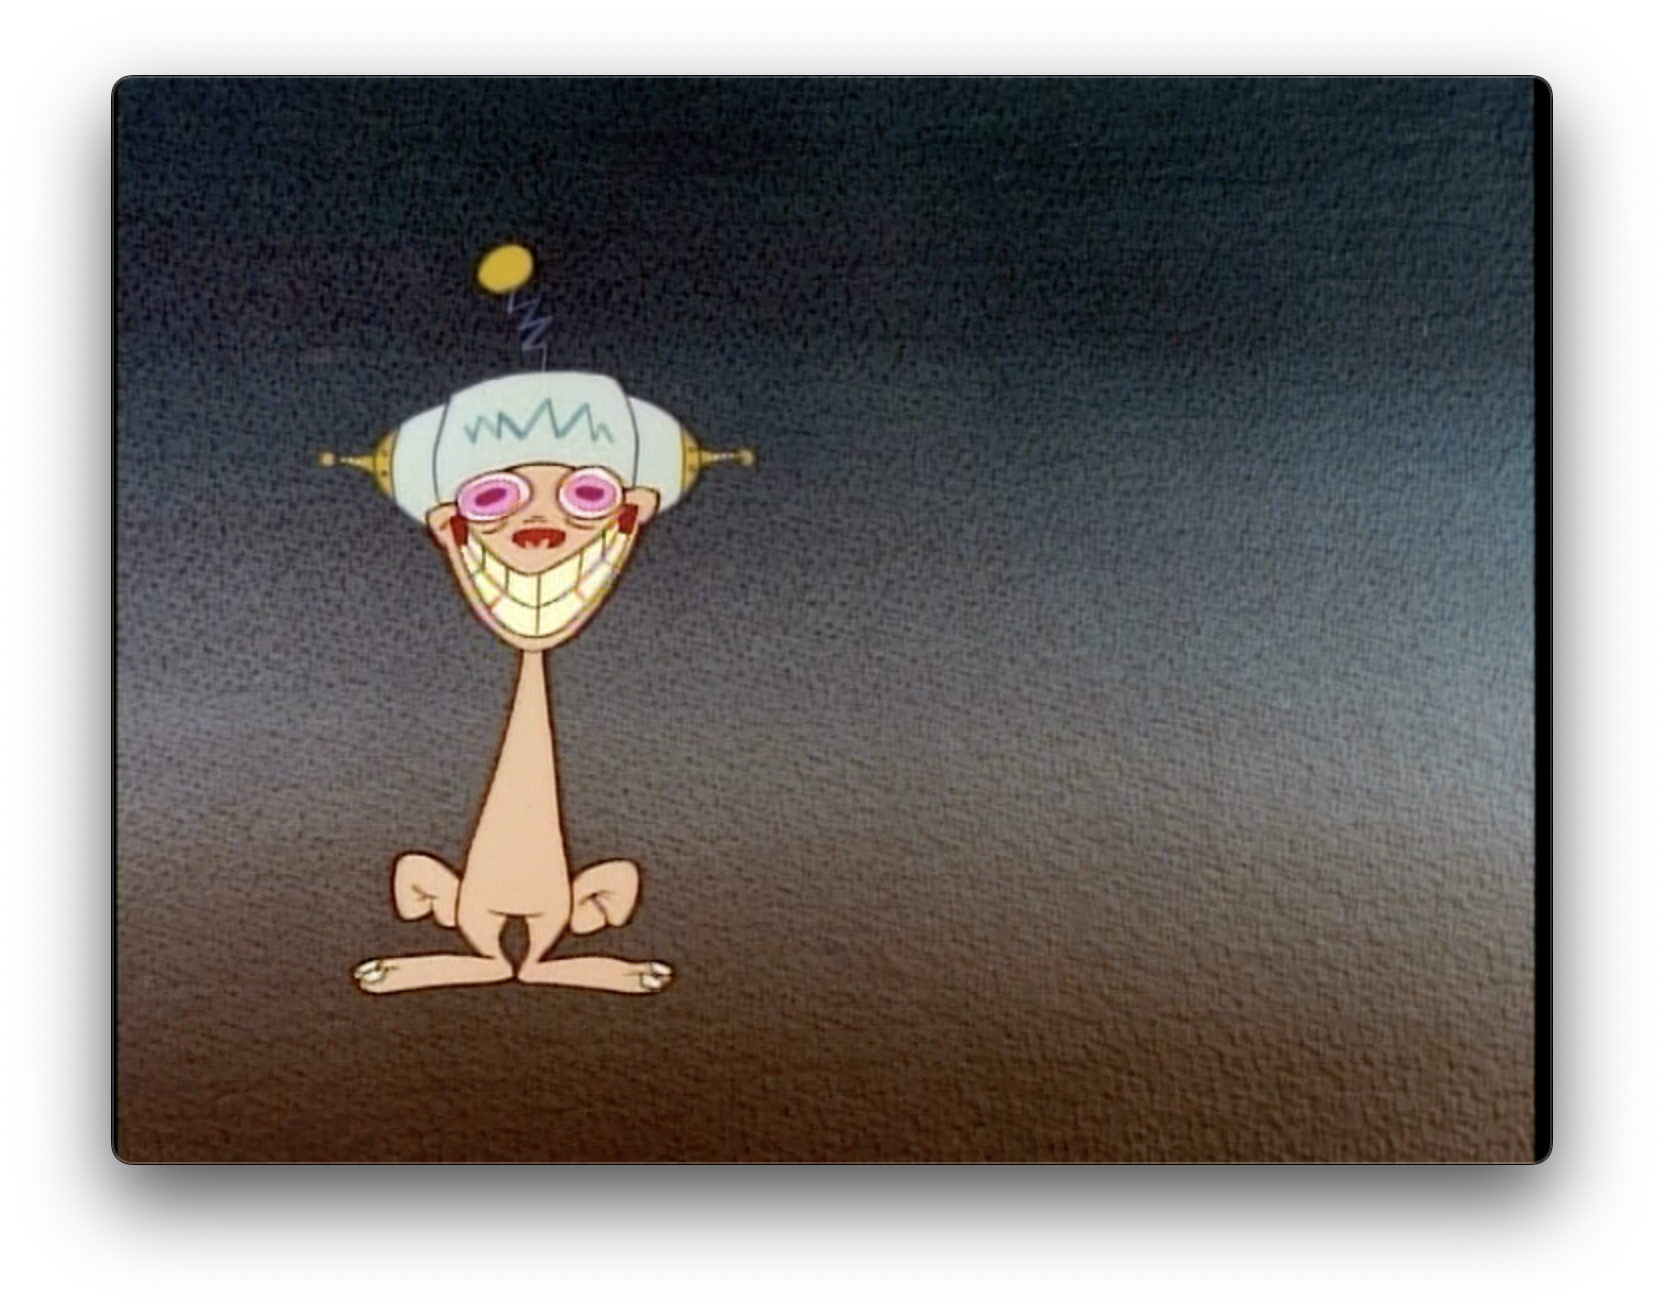 Stimpy rocking the Apple Vision Pro in 1991